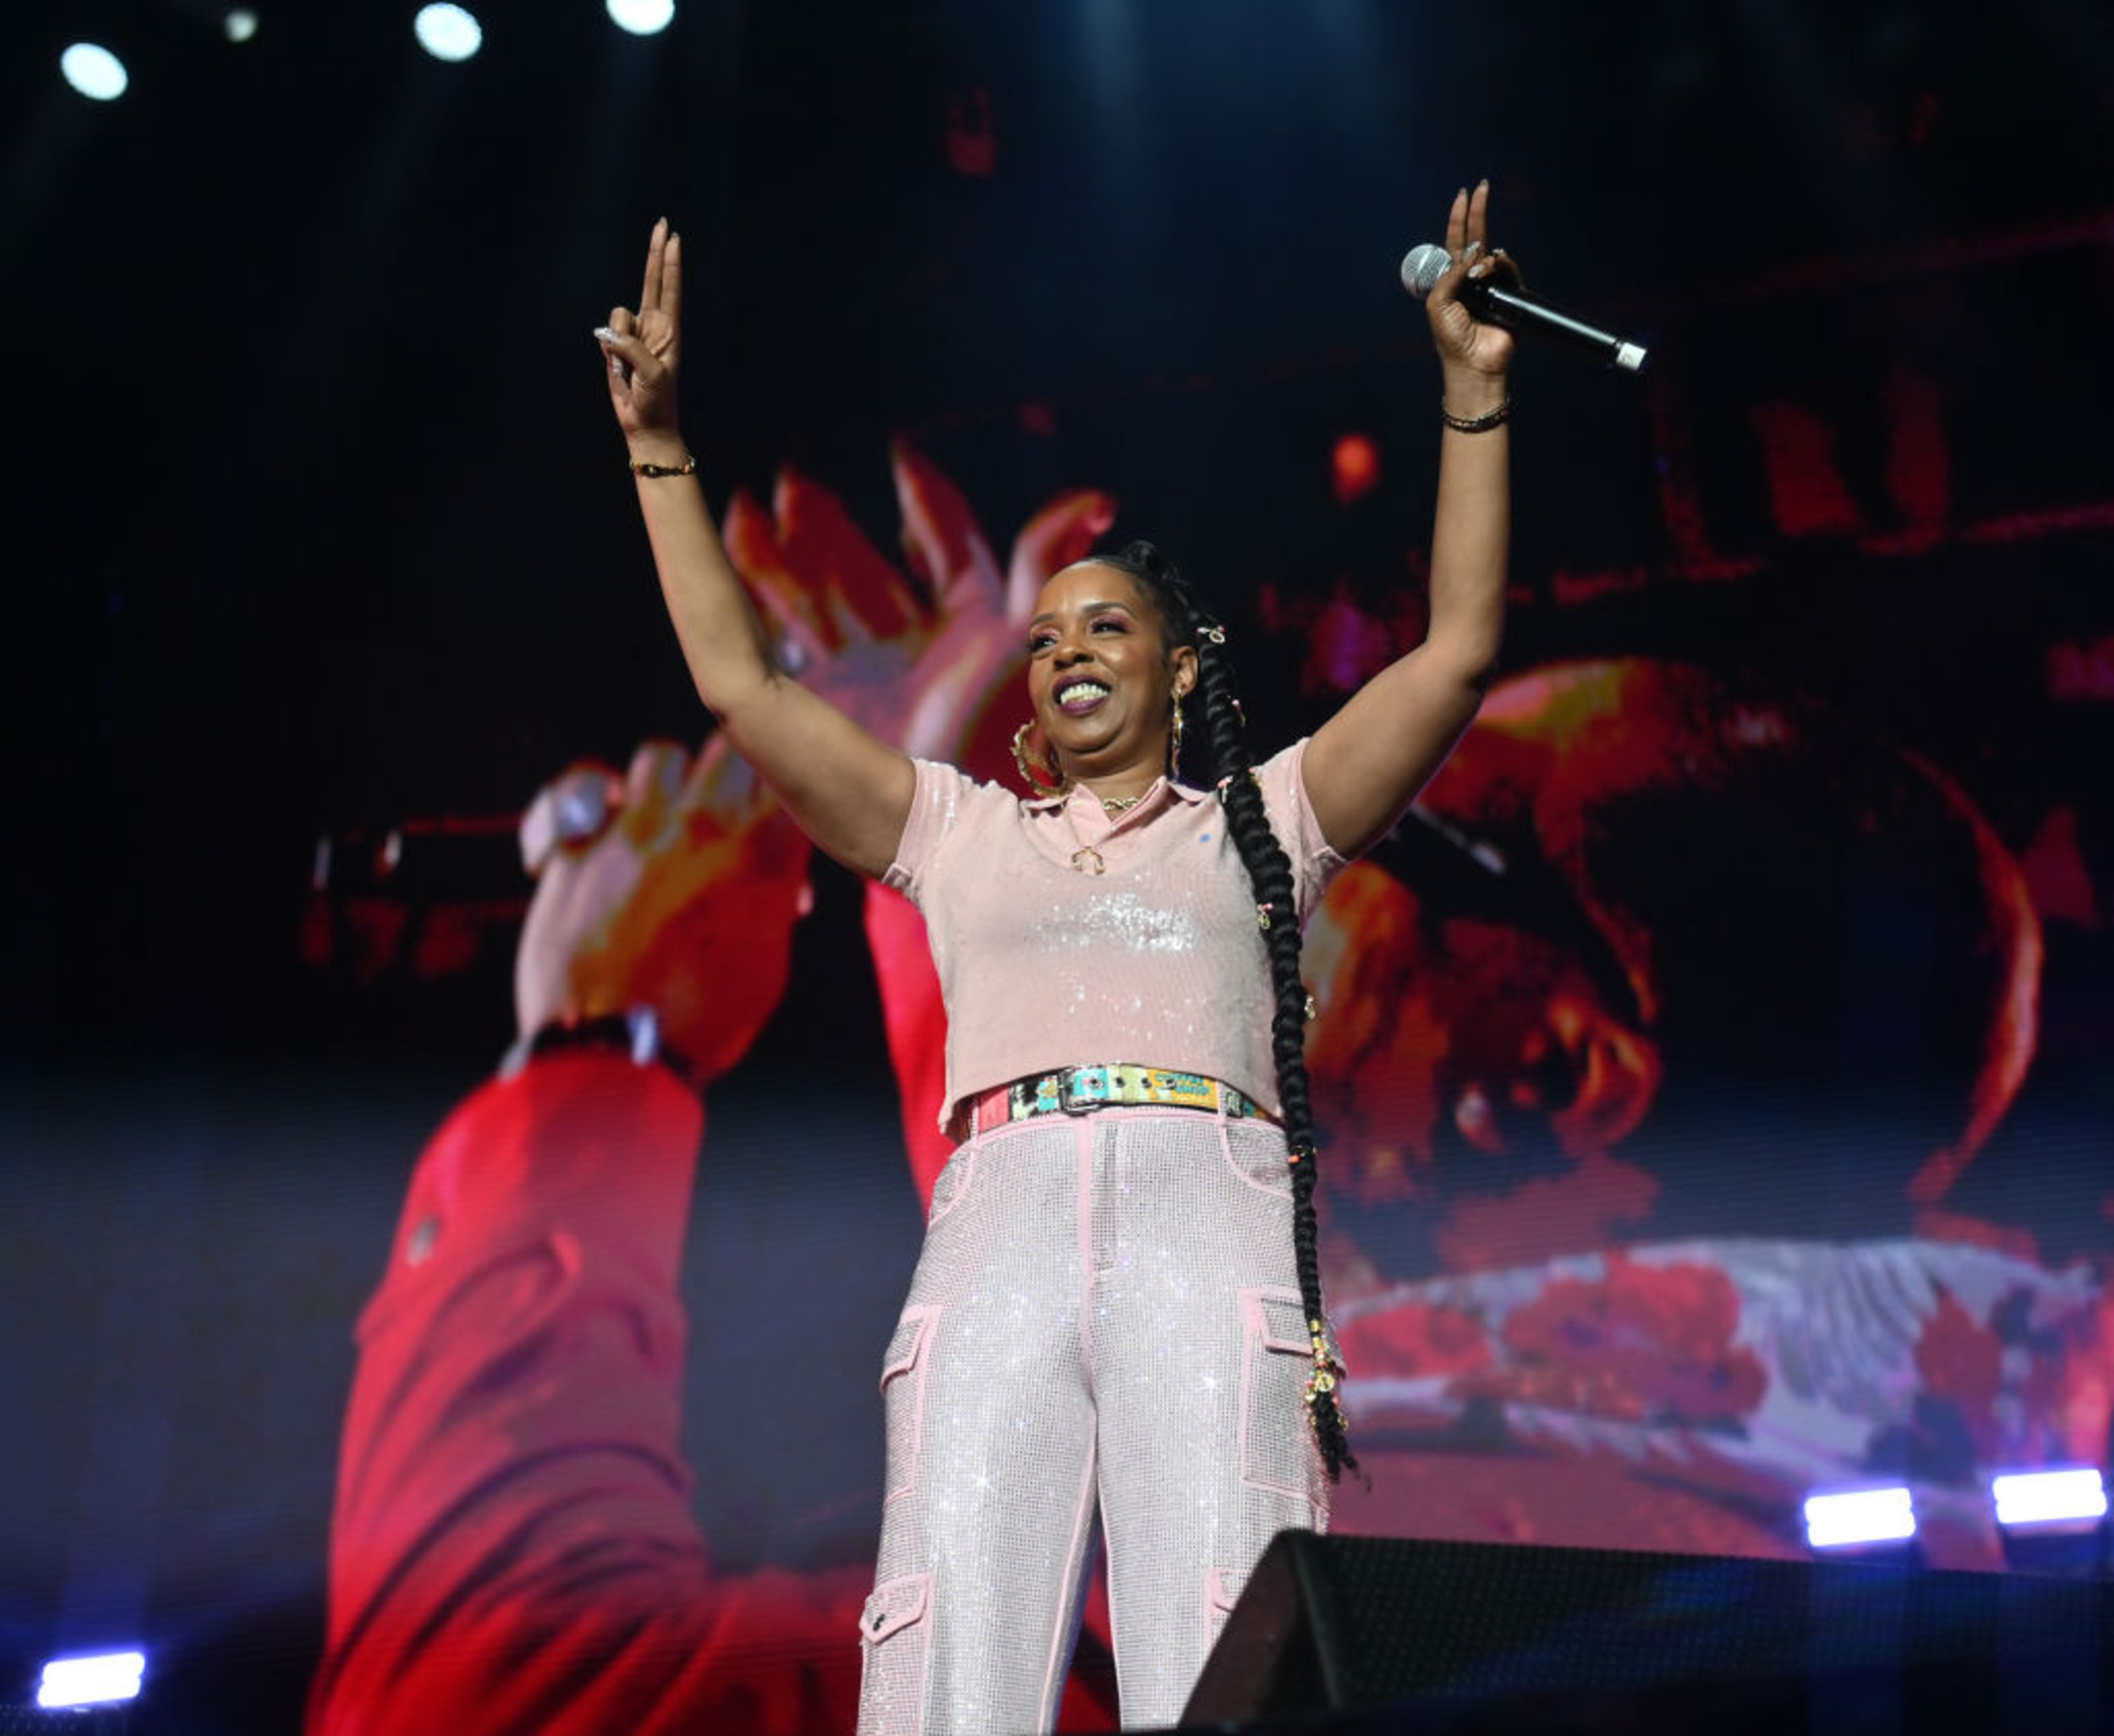 <p>Rah Digga caught the attention of A Tribe Called Quest’s Q-Tip after she performed at a lounge. Q-Tip introduced her to Busta Rhymes, who signed to his Flipmode record imprint. As the only woman in Busta’s hip-hop group Flipmode Squad, Digga always knew how to shine. In 2000, she released her debut album, <em>Harriet,</em> which included features from Busta, Eve, and Carl Thomas. Digga’s other collaborations include the Fugees’ “Cowboys” and Bahamadia’s “Be Ok.” </p><p><a href='https://www.msn.com/en-us/community/channel/vid-cj9pqbr0vn9in2b6ddcd8sfgpfq6x6utp44fssrv6mc2gtybw0us'>Did you enjoy this slideshow? Follow us on MSN to see more of our exclusive entertainment content.</a></p>